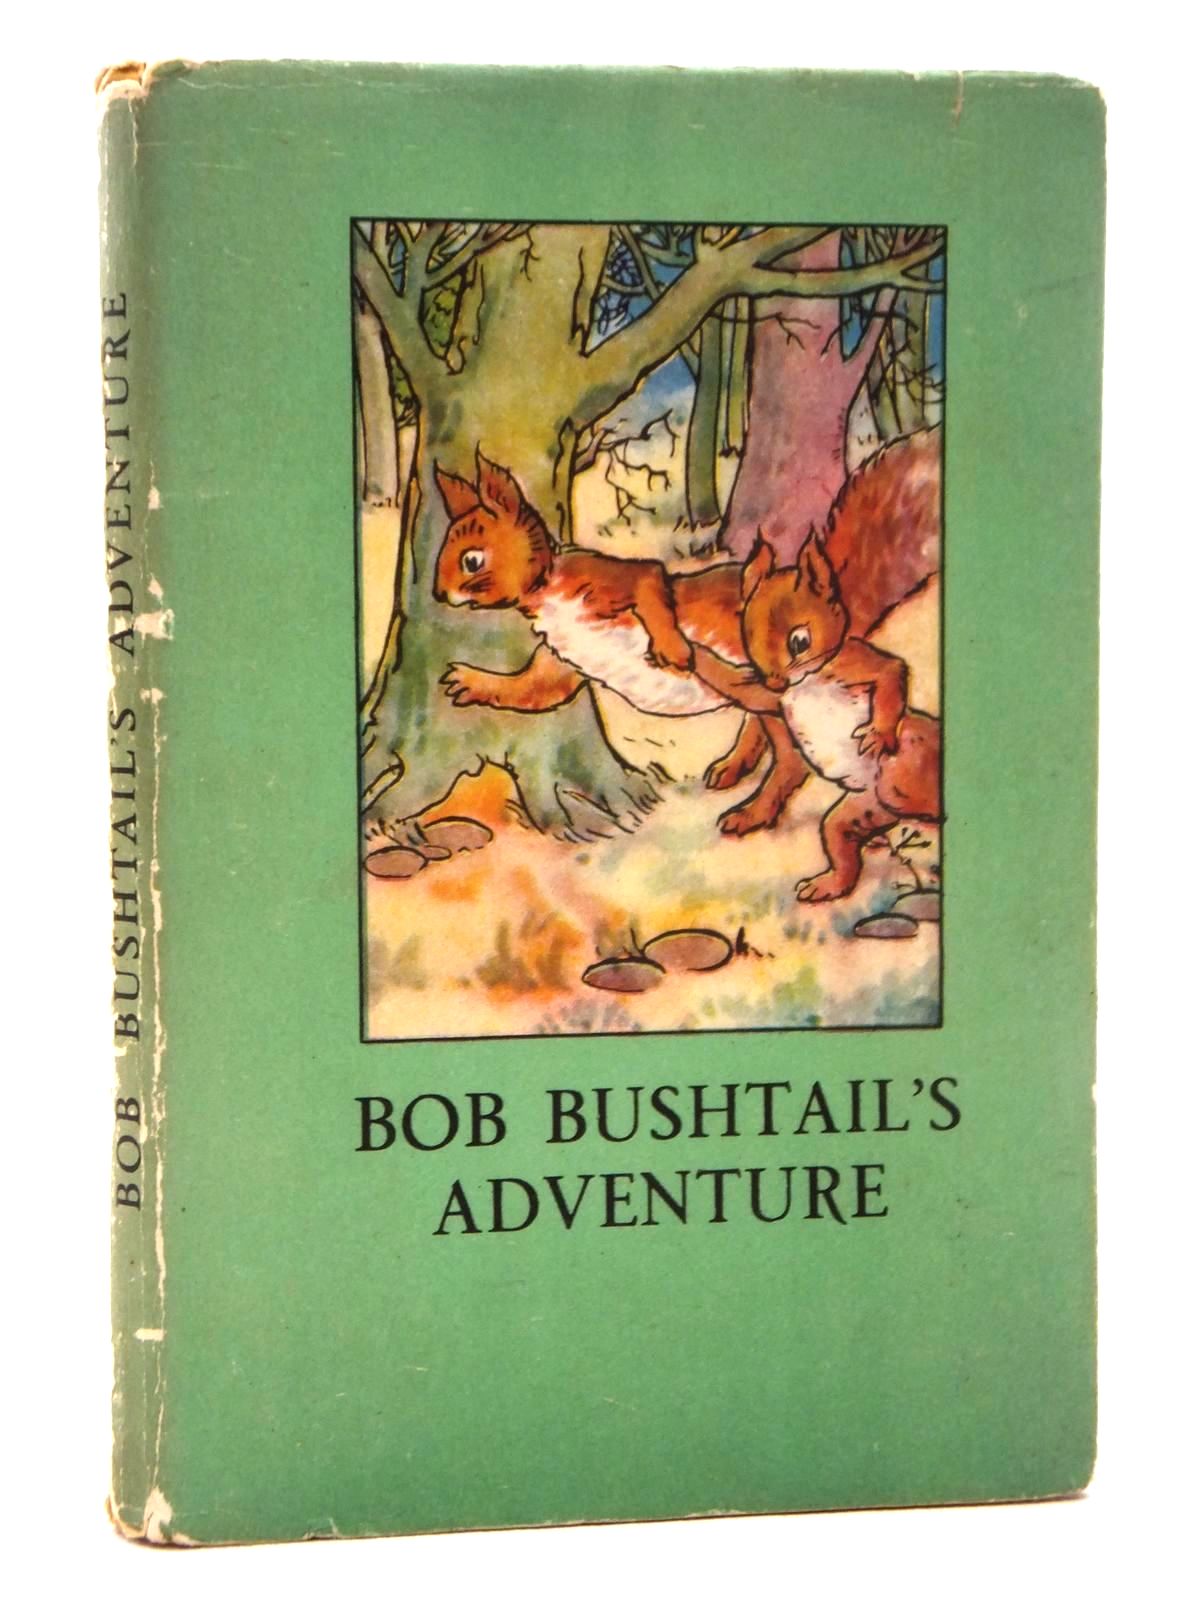 Photo of BOB BUSHTAIL'S ADVENTURE written by Macgregor, A.J.
Perring, W. illustrated by Macgregor, A.J. published by Wills & Hepworth Ltd. (STOCK CODE: 2123808)  for sale by Stella & Rose's Books